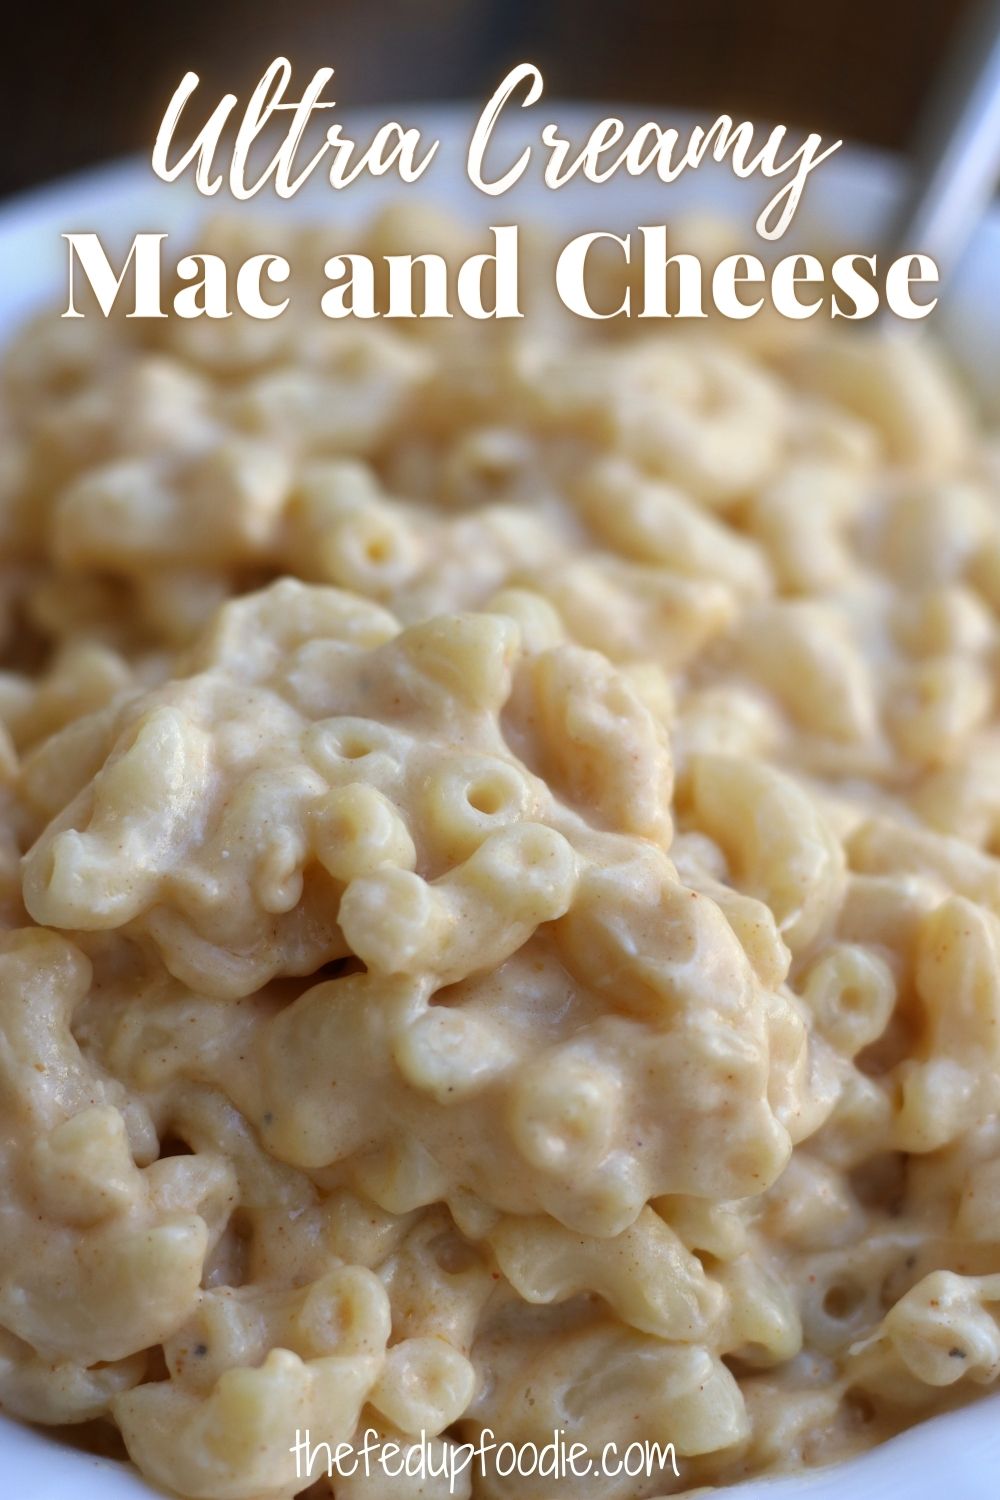 Out of this world Creamy Mac and Cheese is easily made on the stovetop but can be baked with a crispy Panko topping. This recipe is always a family favorite for holidays, summer BBQ or served as a big bowl of comfort eating. 
#MacAndCheeseRecipe #CreamyMacAndCheese #BestMacaroniAndCheeseRecipes #MacAndCheeseEasy #MacaroniAndCheese #CreamyMacaroniAndCheese #TheBestMacAndCheeseRecipe